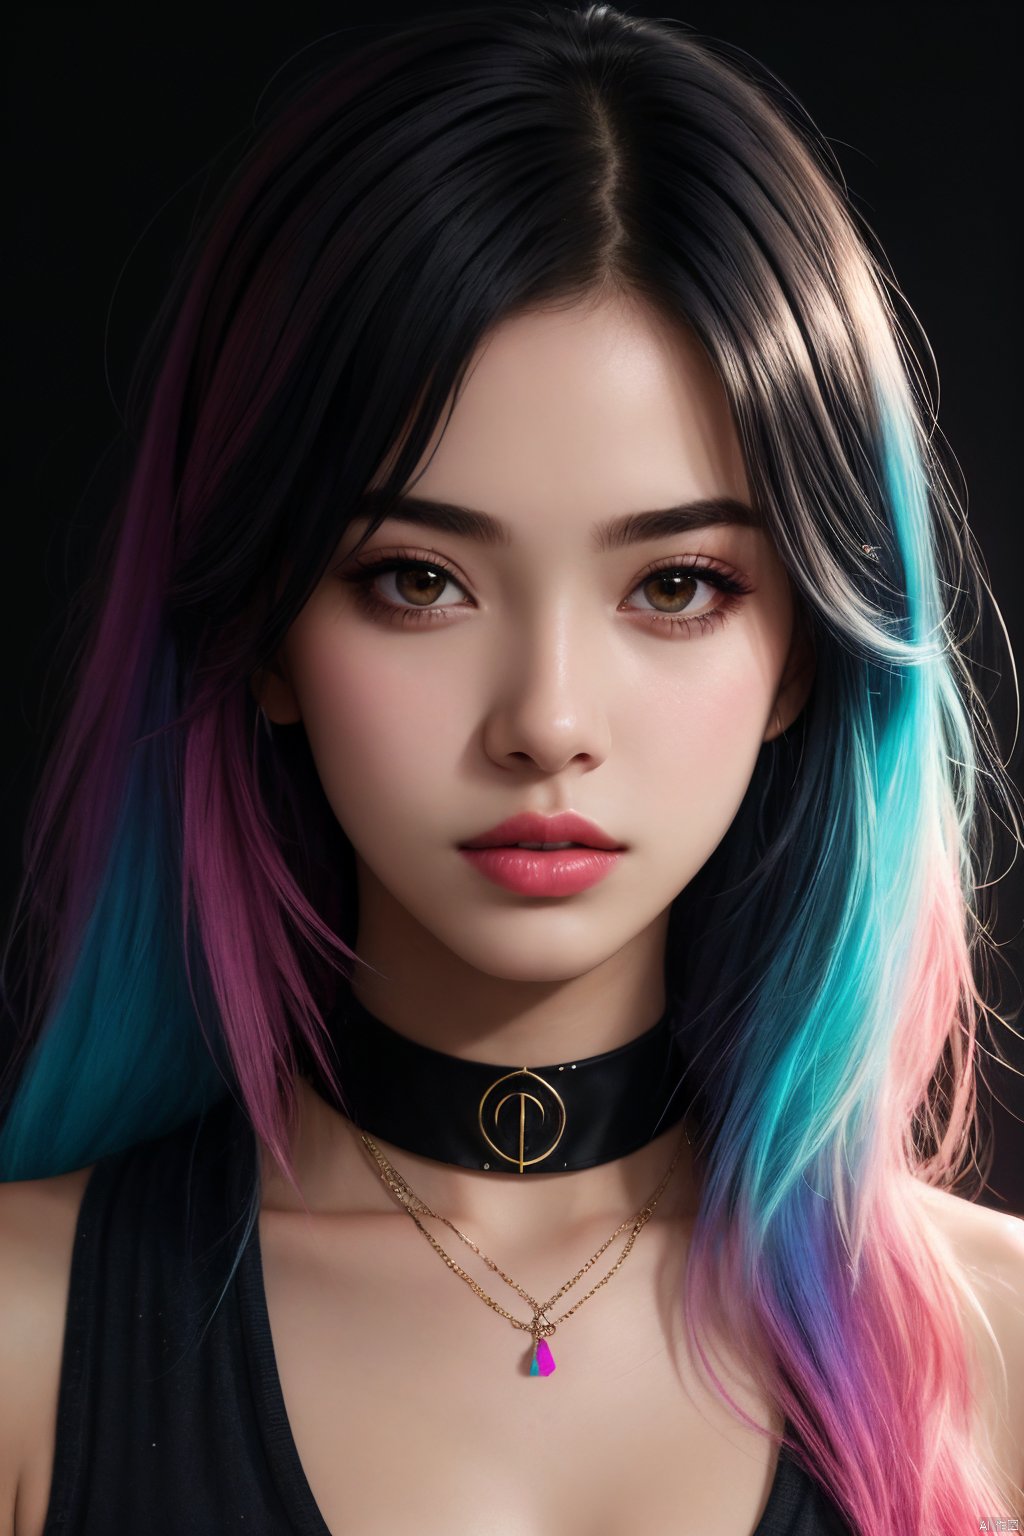  1girl, isometric, shukezouma, octane render, hdr, (hyperdetailed:1.15), (soft light, sharp:1.2), aesthetic, (Argentinian |Cuban |Colombian |Mexican) 20 years old woman, (detailed facial features), gorgeous face, grunge style, standing in her messy bedroom, pale skin, wearing eyeliner, grainy, pastel goth, scene hair, (emo girl), teased hair, wearing bracelets, wearing choker necklace, ((detailed face)), selfie, rainbow painting drops, paint teardrops, girl made up from paint, entirely paint, splat, splash, paint bulb, paint drops, broad light, backlighting, bloom, light sparkles, chromatic aberration, (bubblegum Vaporwave aesthetic),Rashmikasdxl